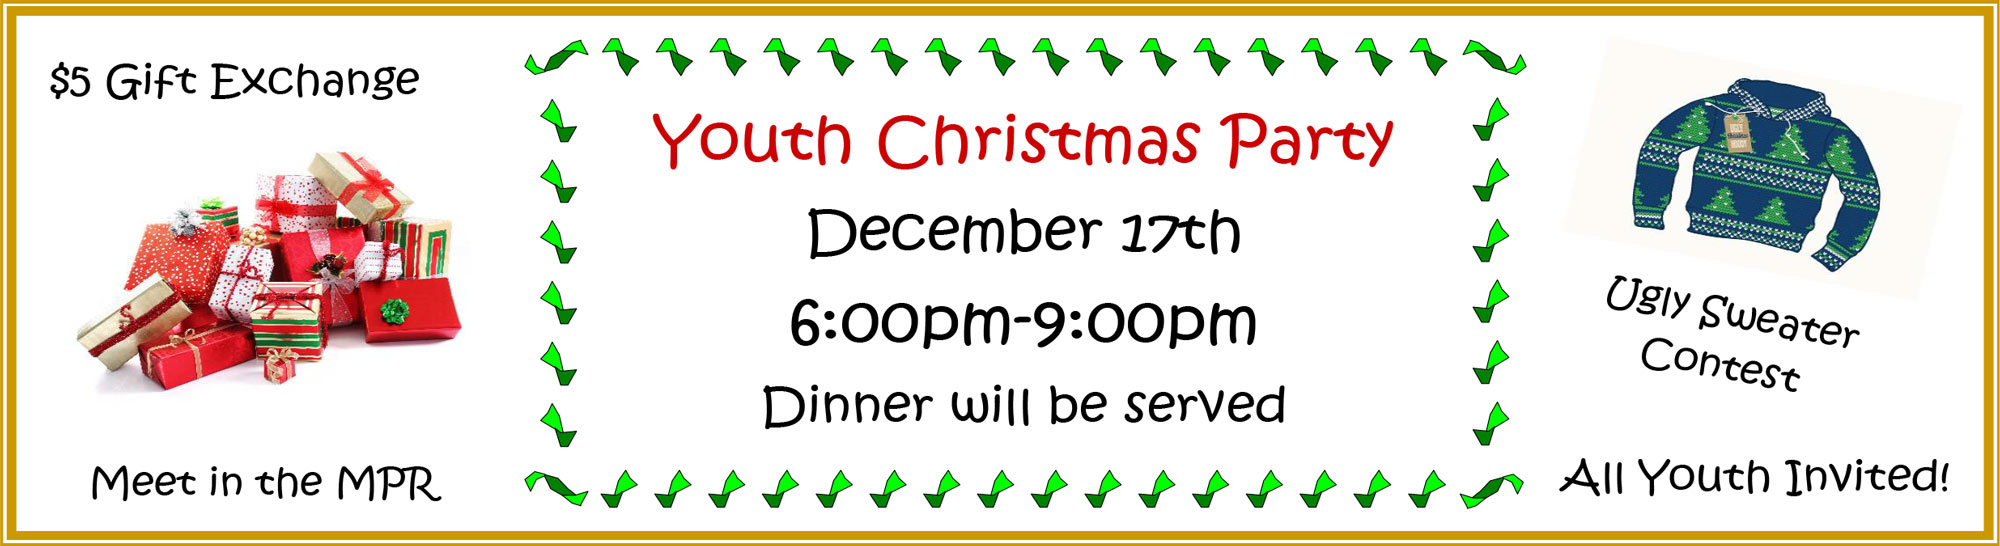 youth-christmas-party